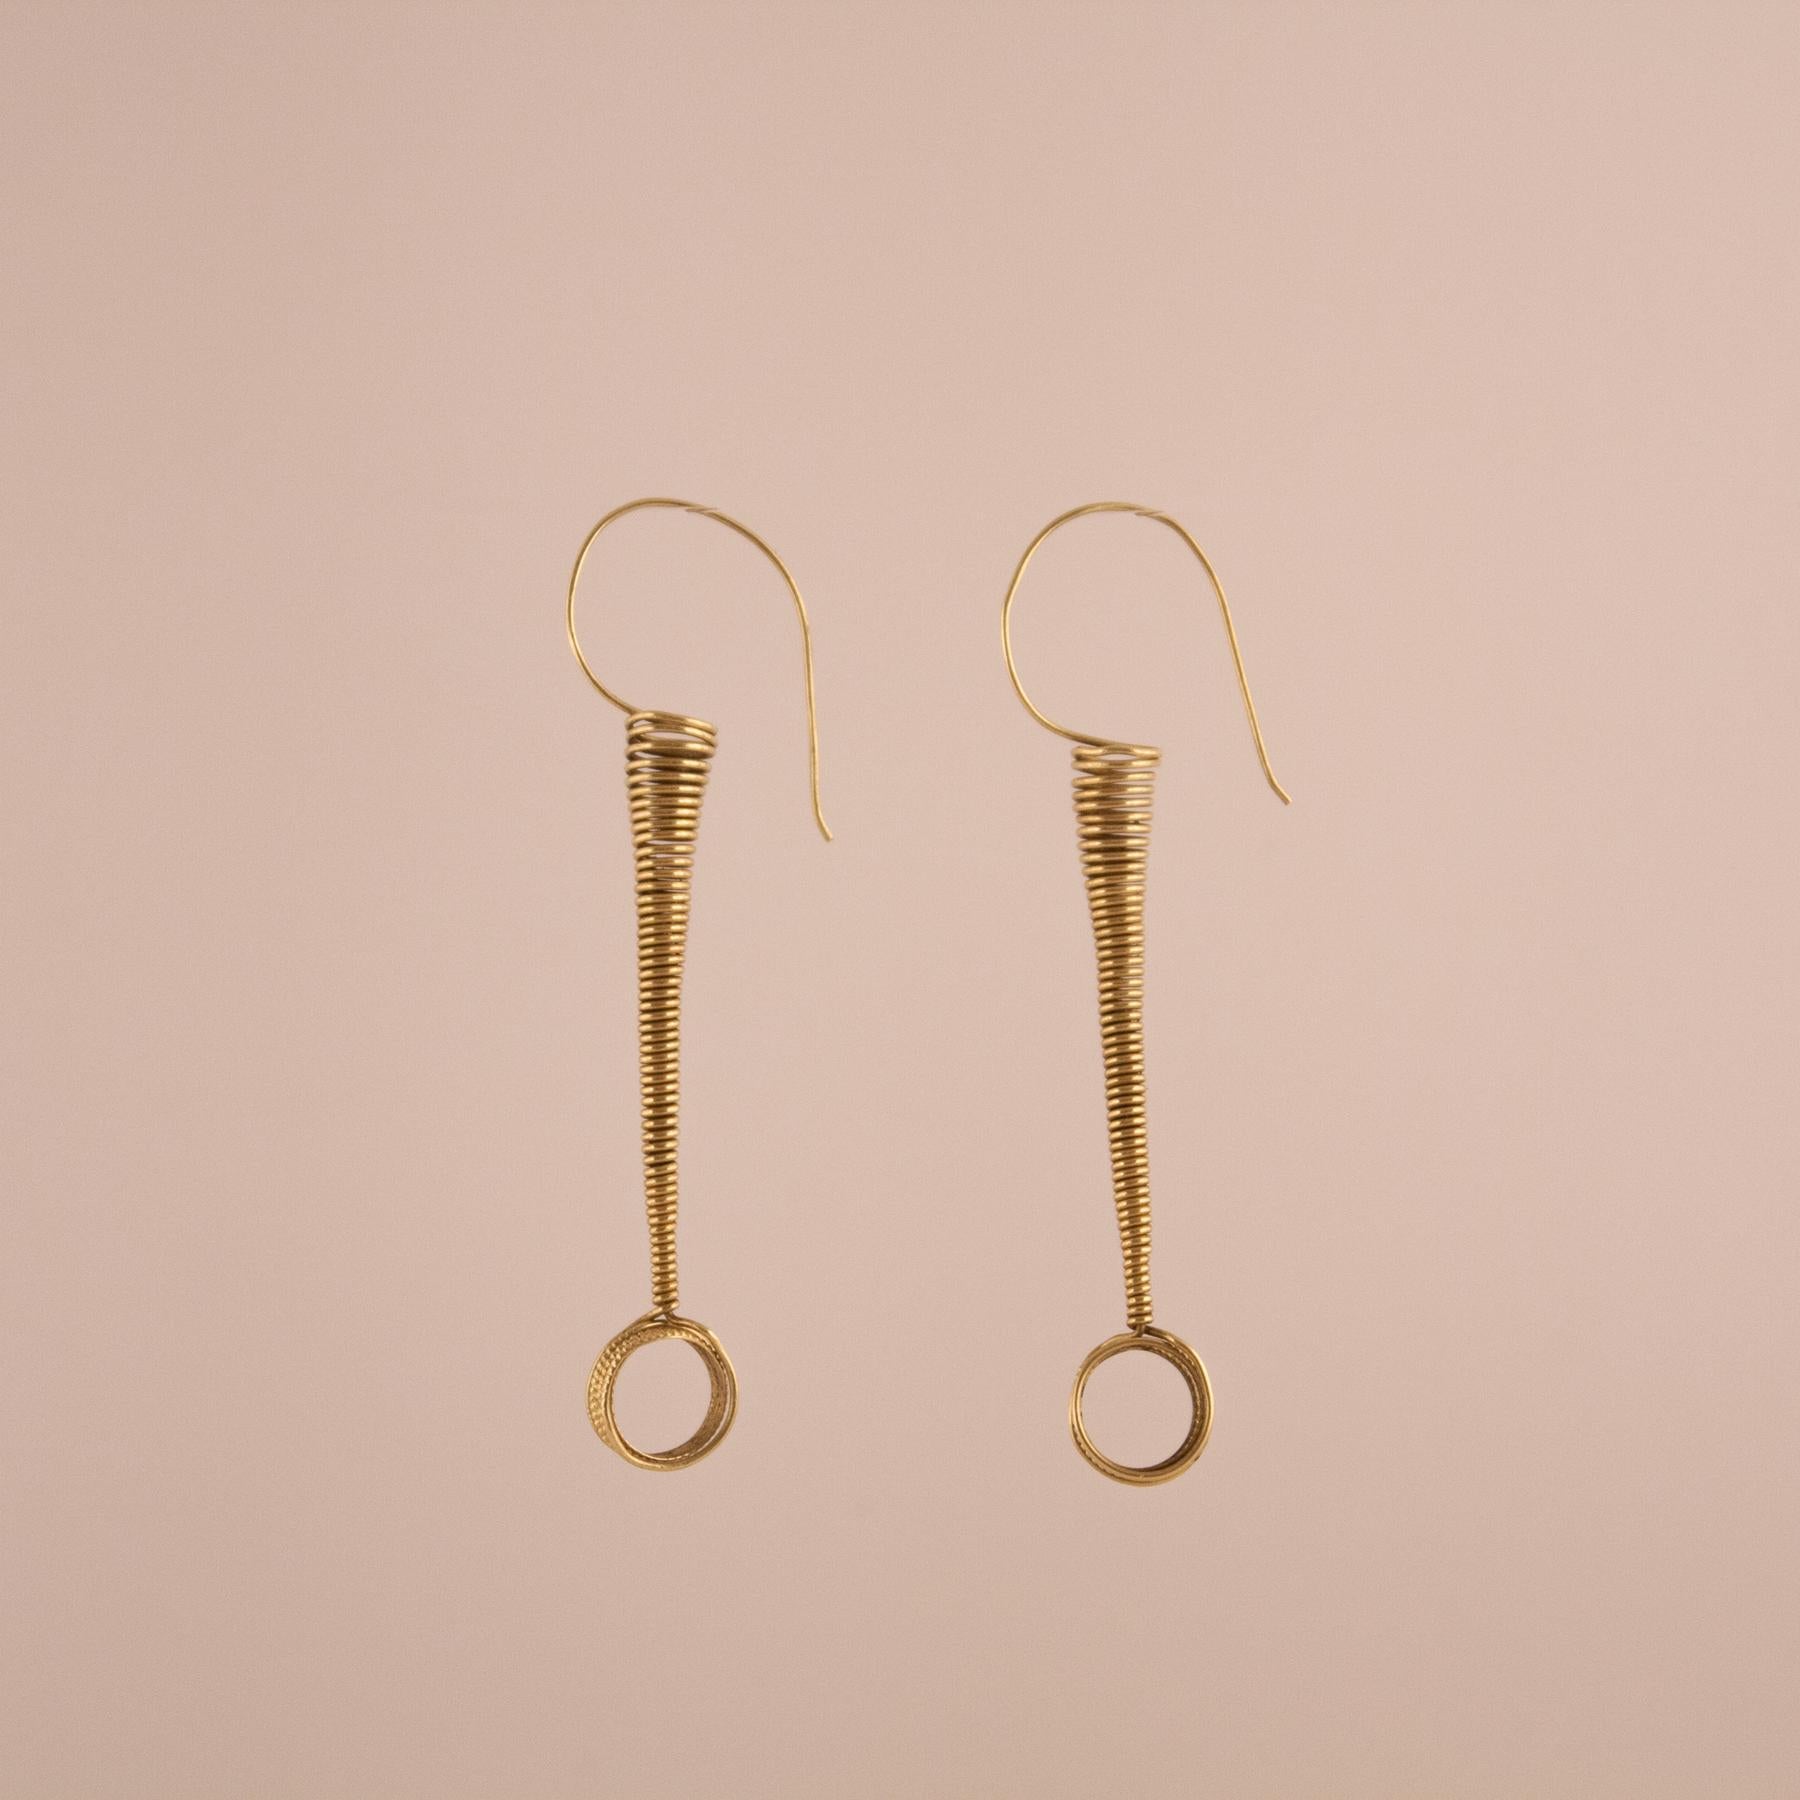 18 karat gold coil earrings from India, circa 1970. Lightweight, flexible and fun, these spring-like earrings are, at once, tribal and contemporary in appearance. 
Gold: 10.12 grams